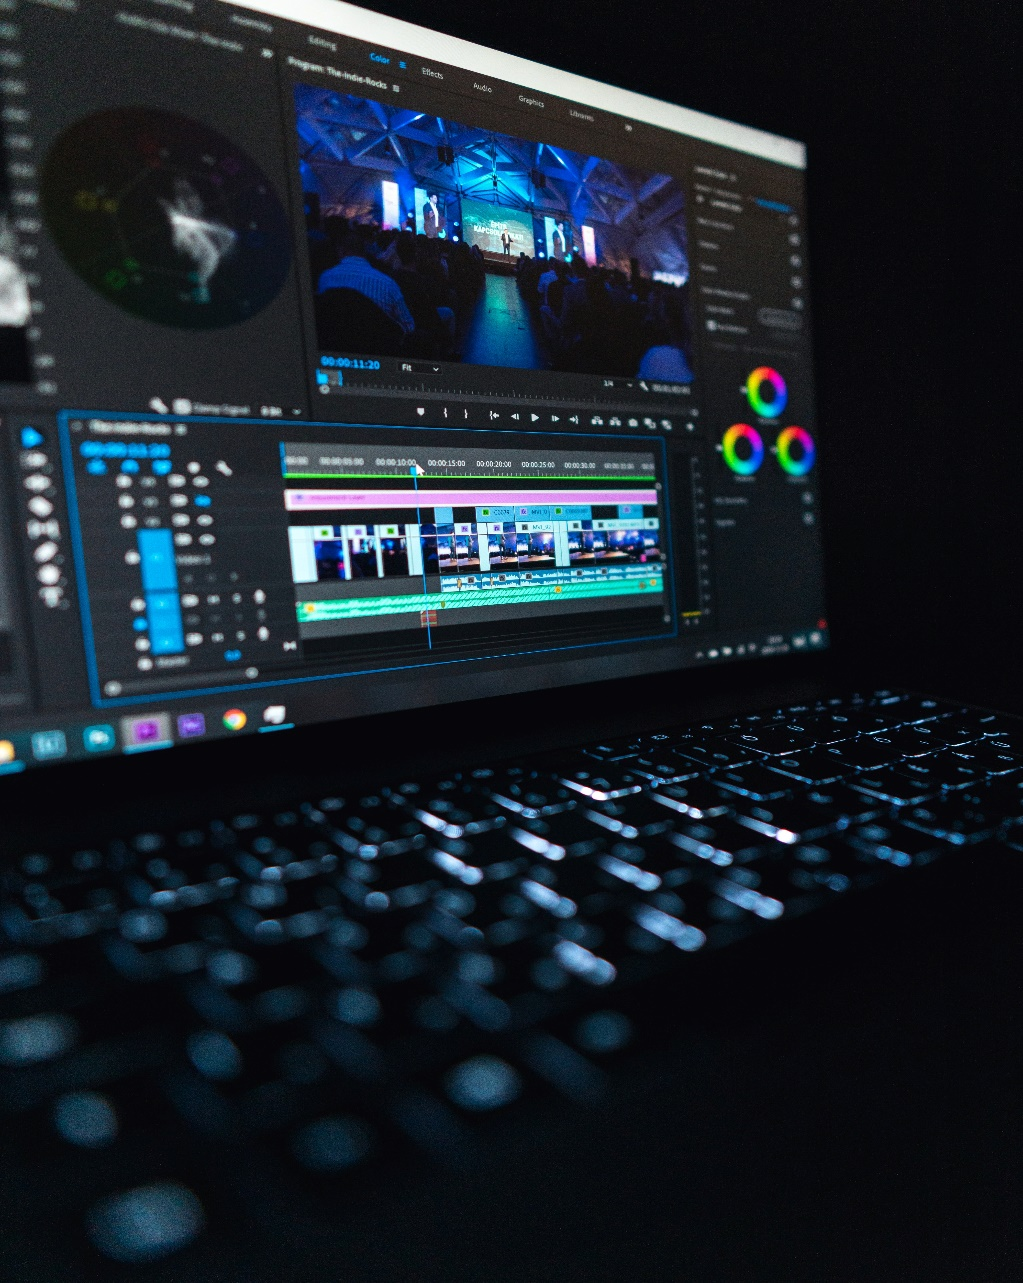 Premire Pro Workflow during Video Editing